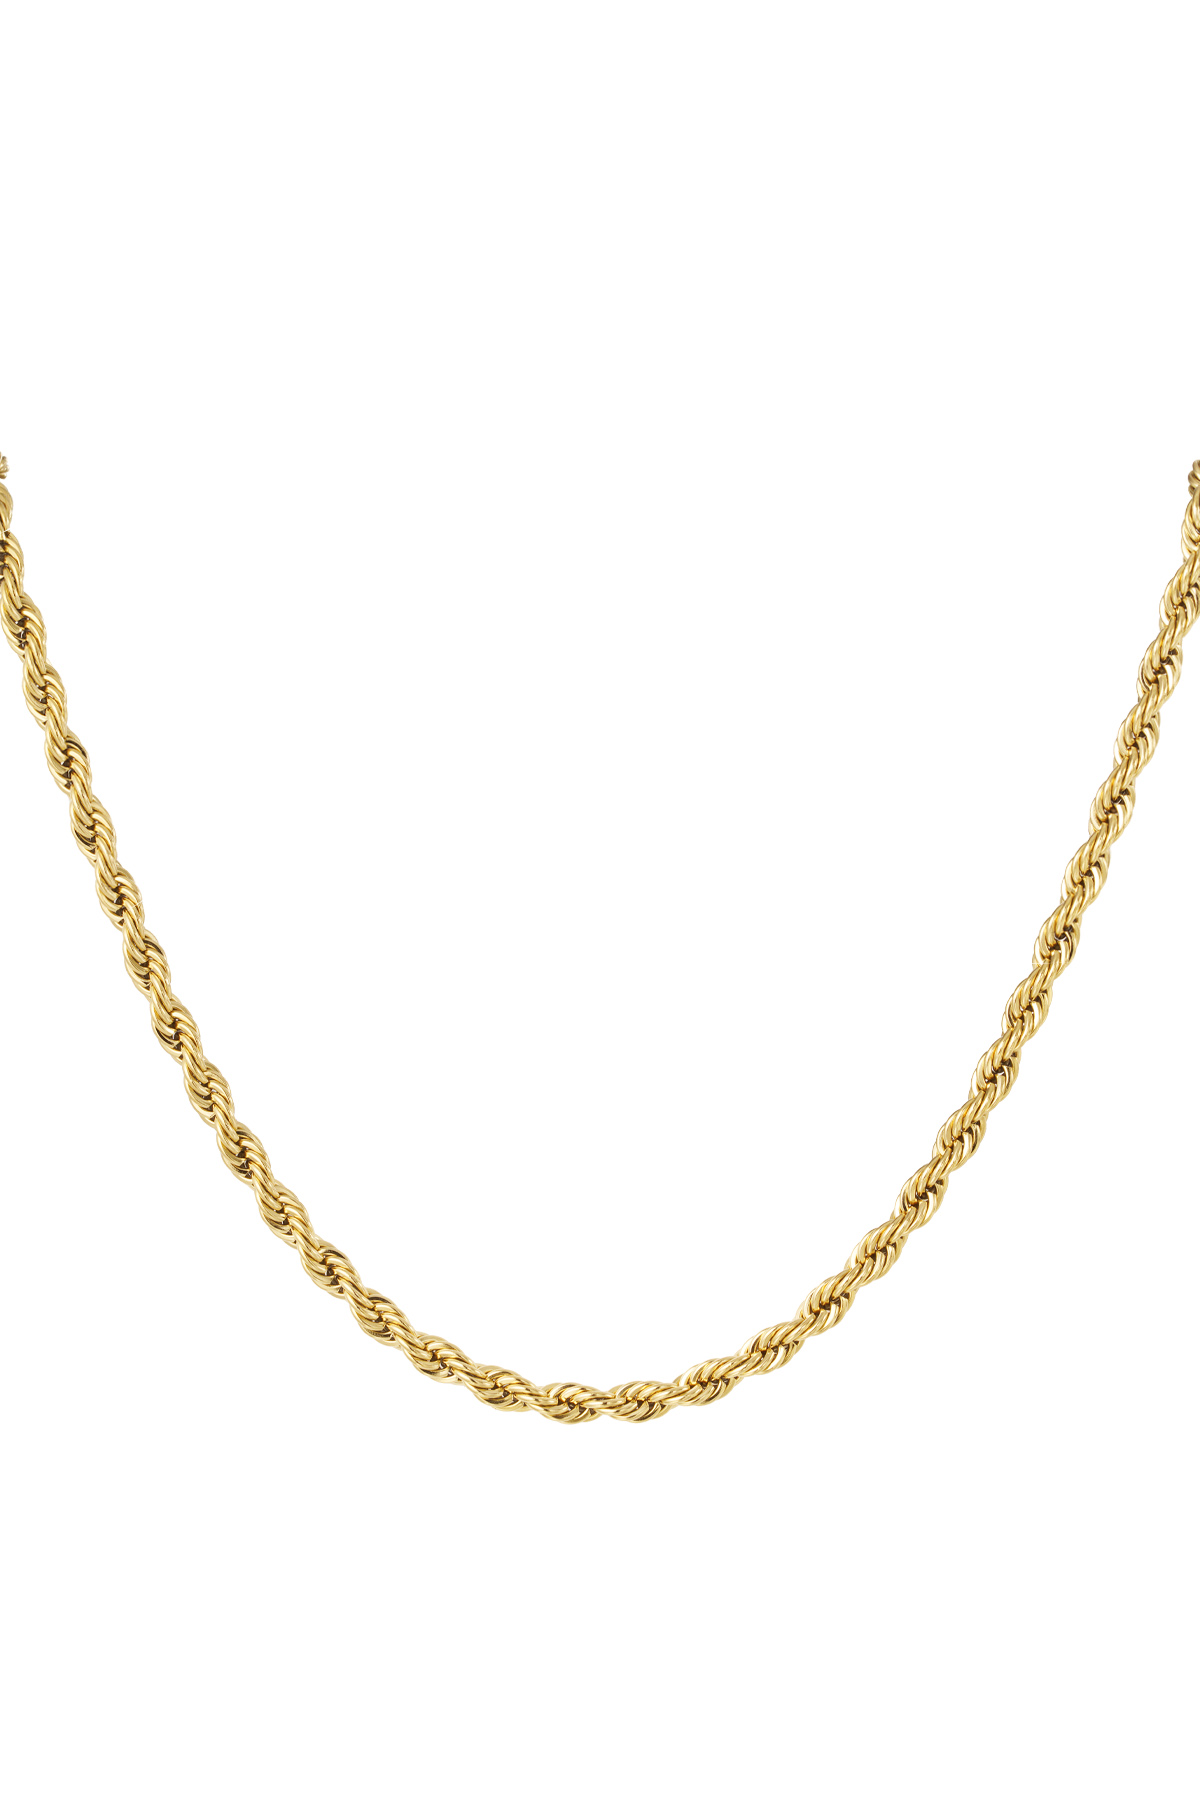 Unisex necklace thick twisted 60cm - gold